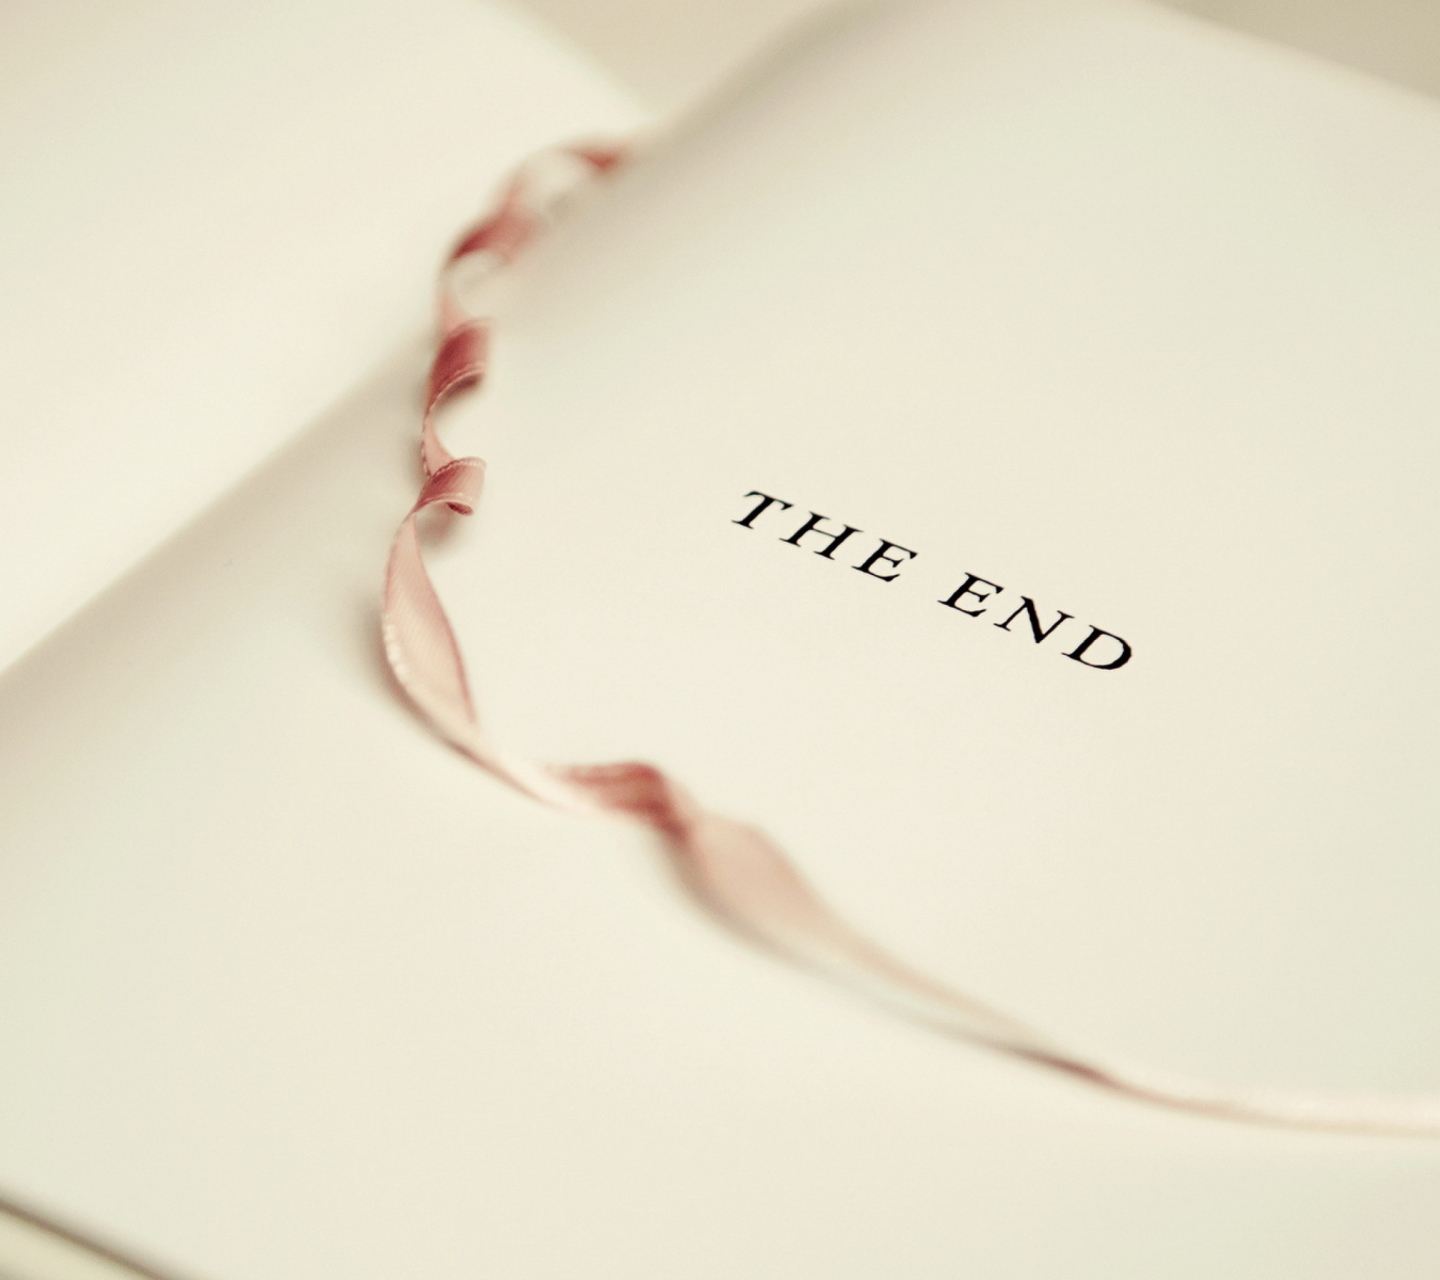 Обои The End Of Book 1440x1280